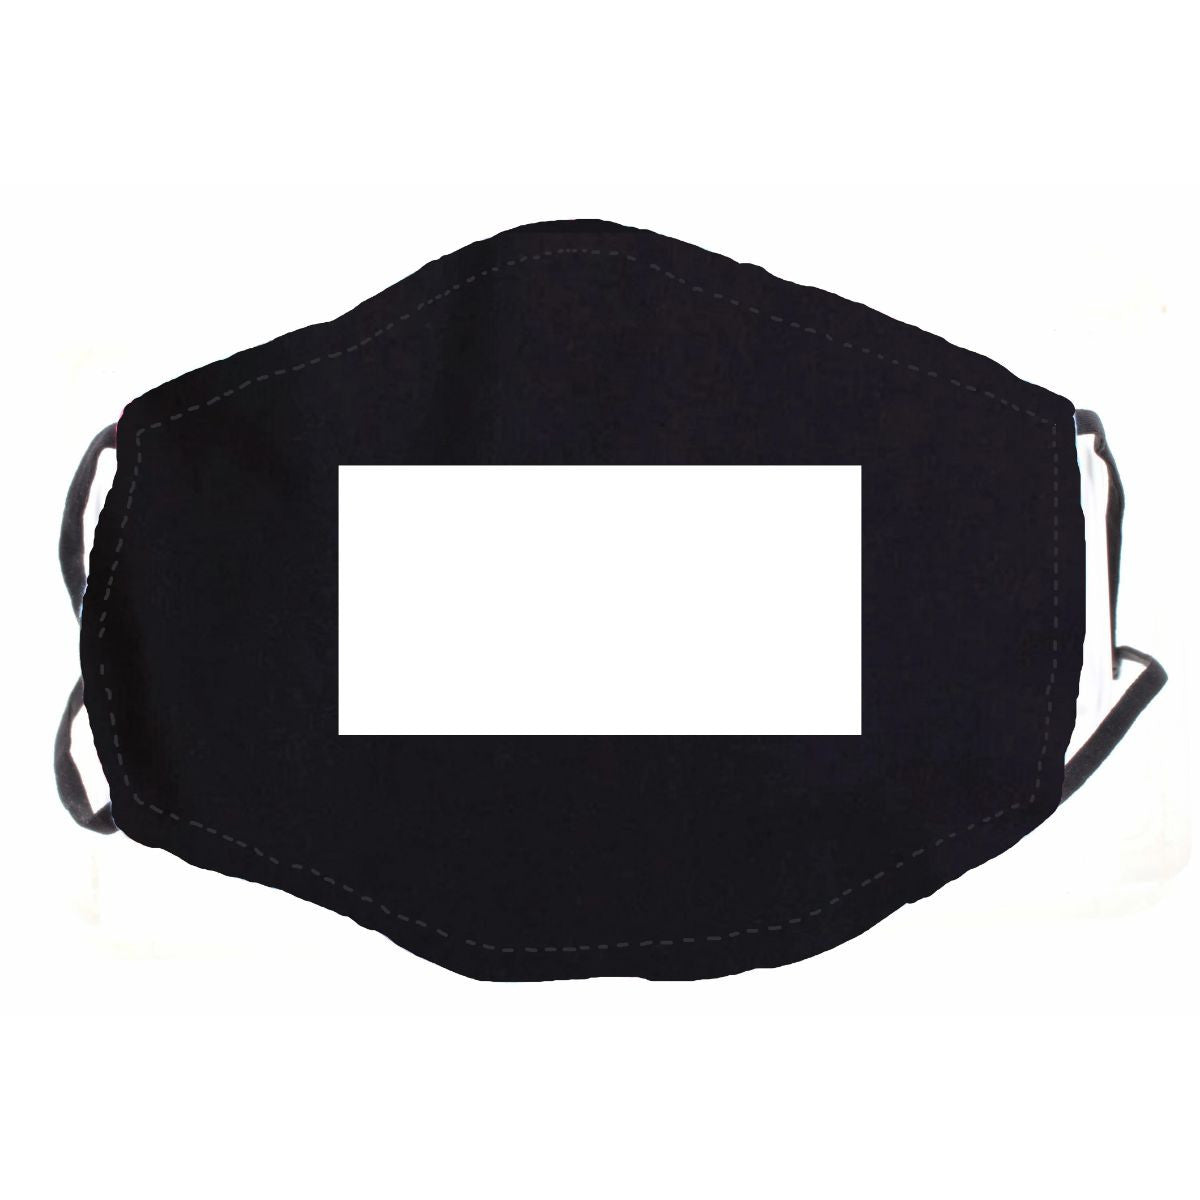 BLACK WITH CLEAR WINDOW FACE MASK, ADJUSTABLE ELASTIC EAR STRAPS